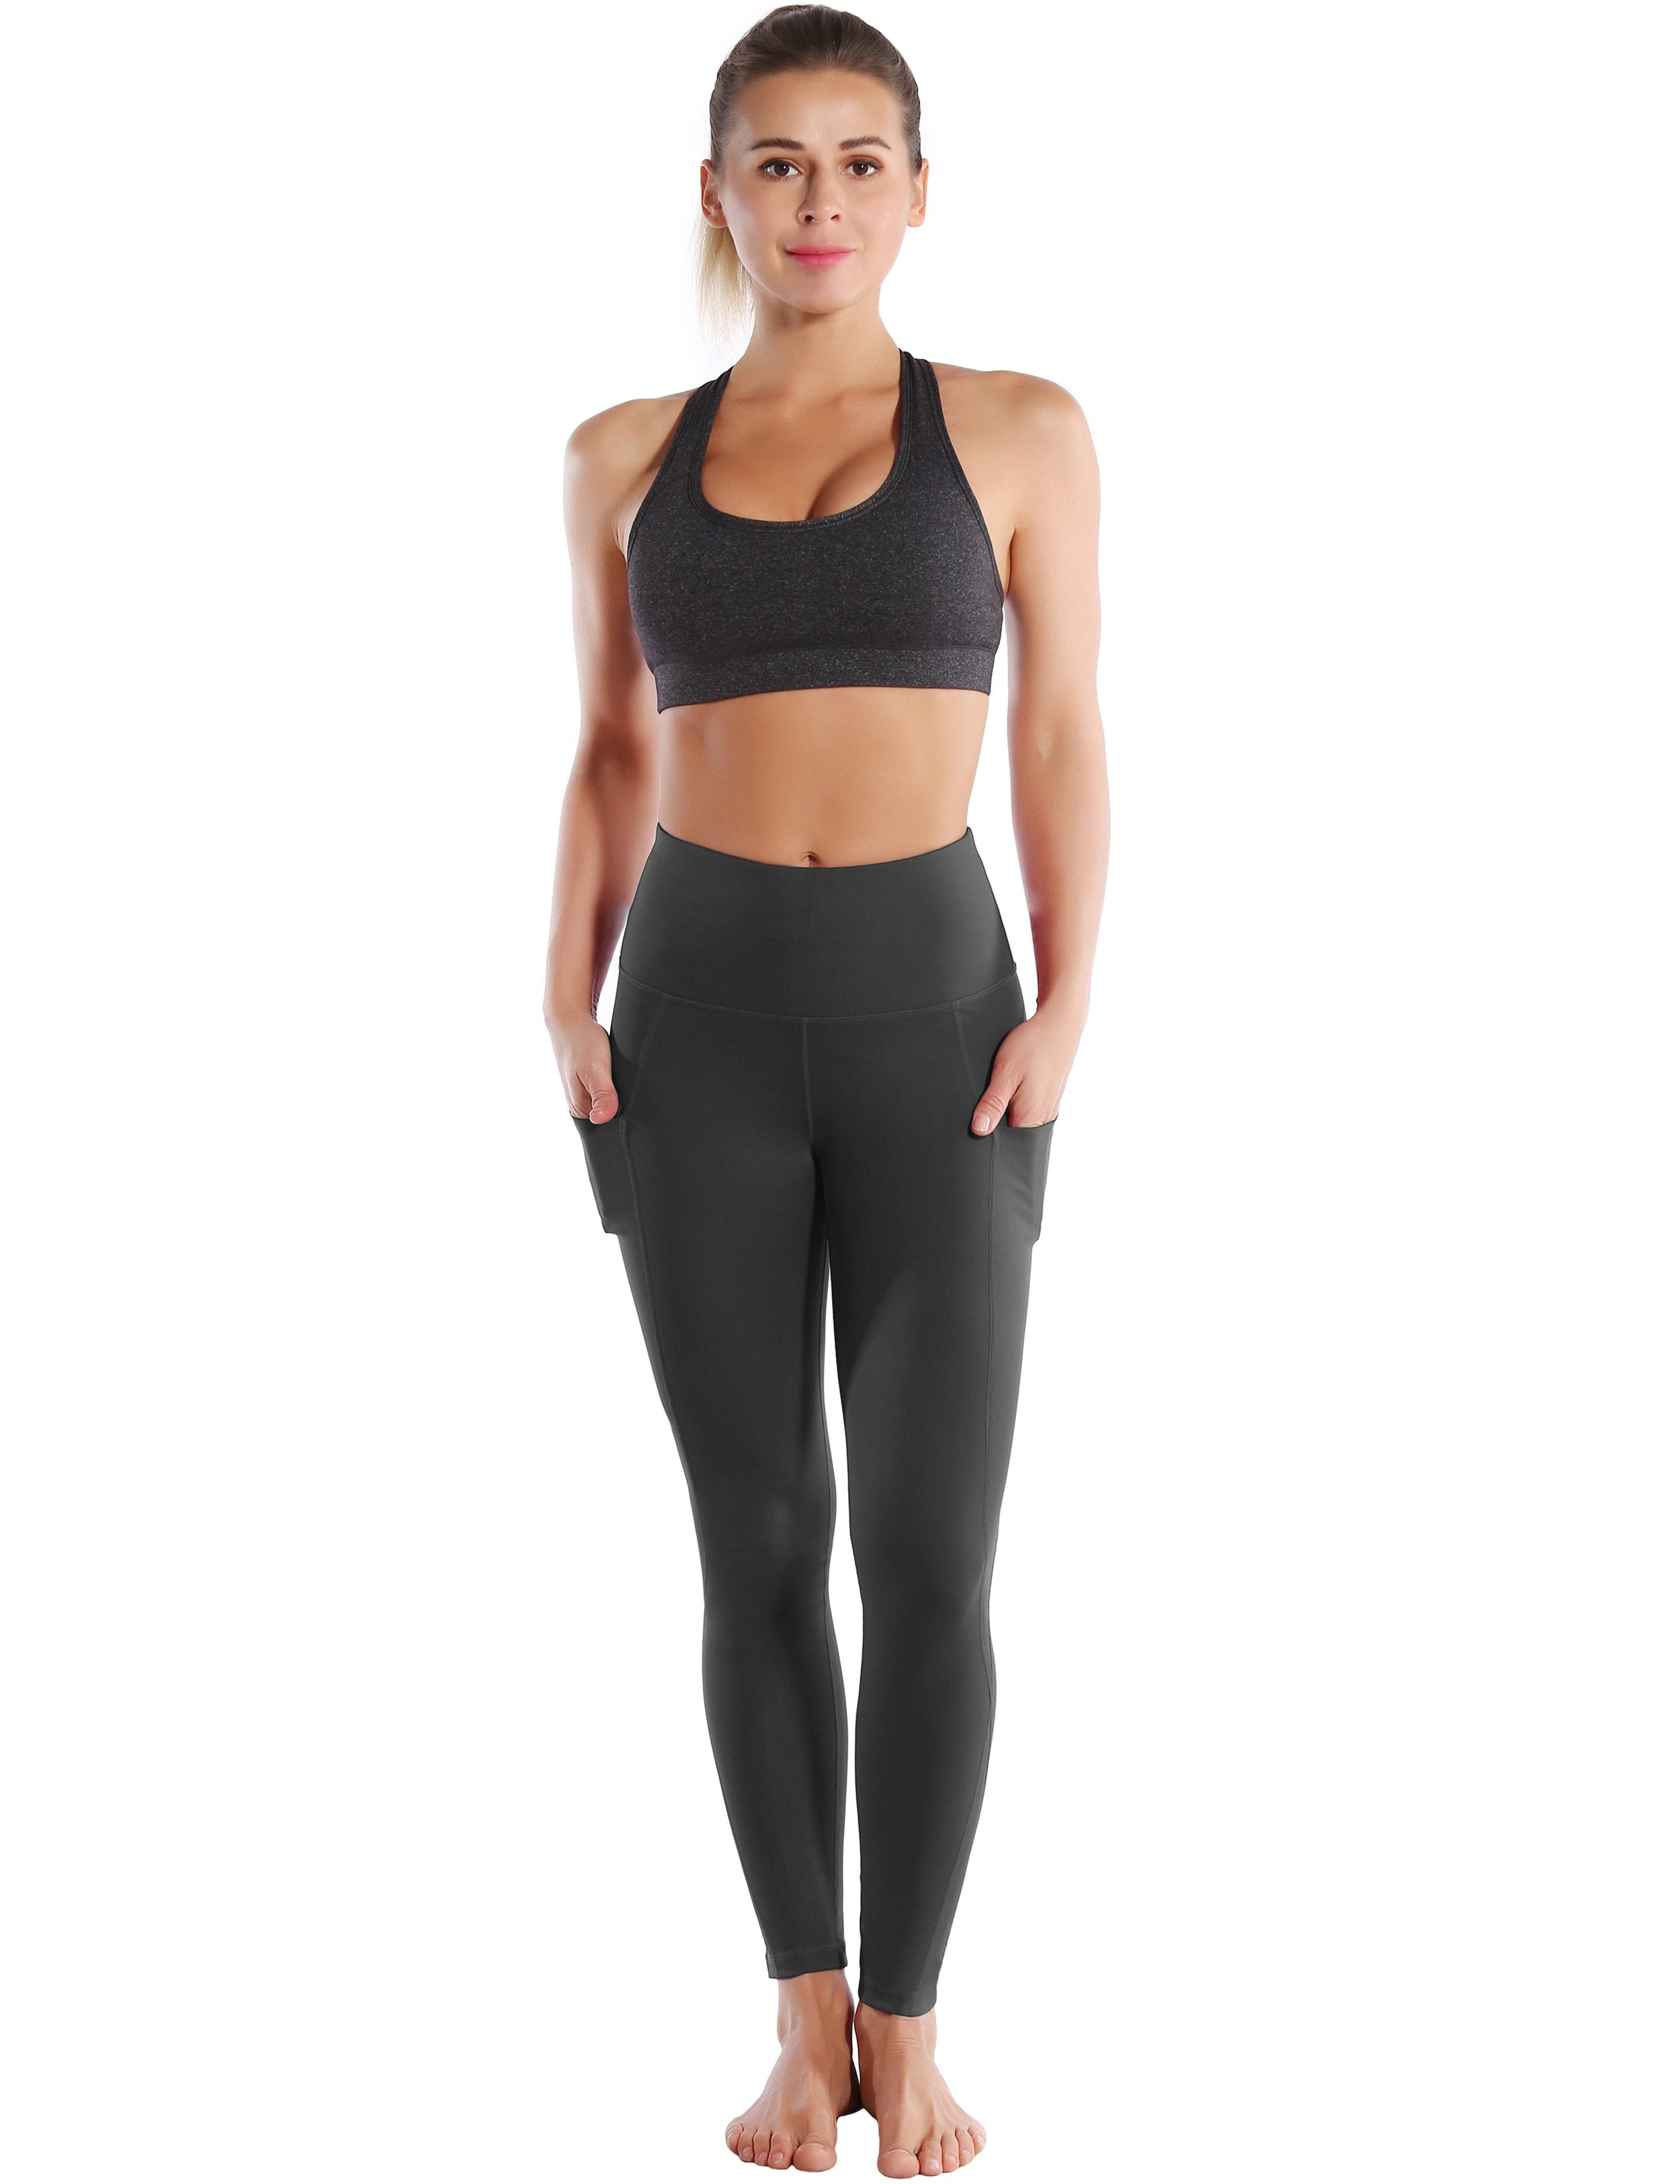 High Waist Side Pockets Jogging Pants shadowcharcoal 75% Nylon, 25% Spandex Fabric doesn't attract lint easily 4-way stretch No see-through Moisture-wicking Tummy control Inner pocket